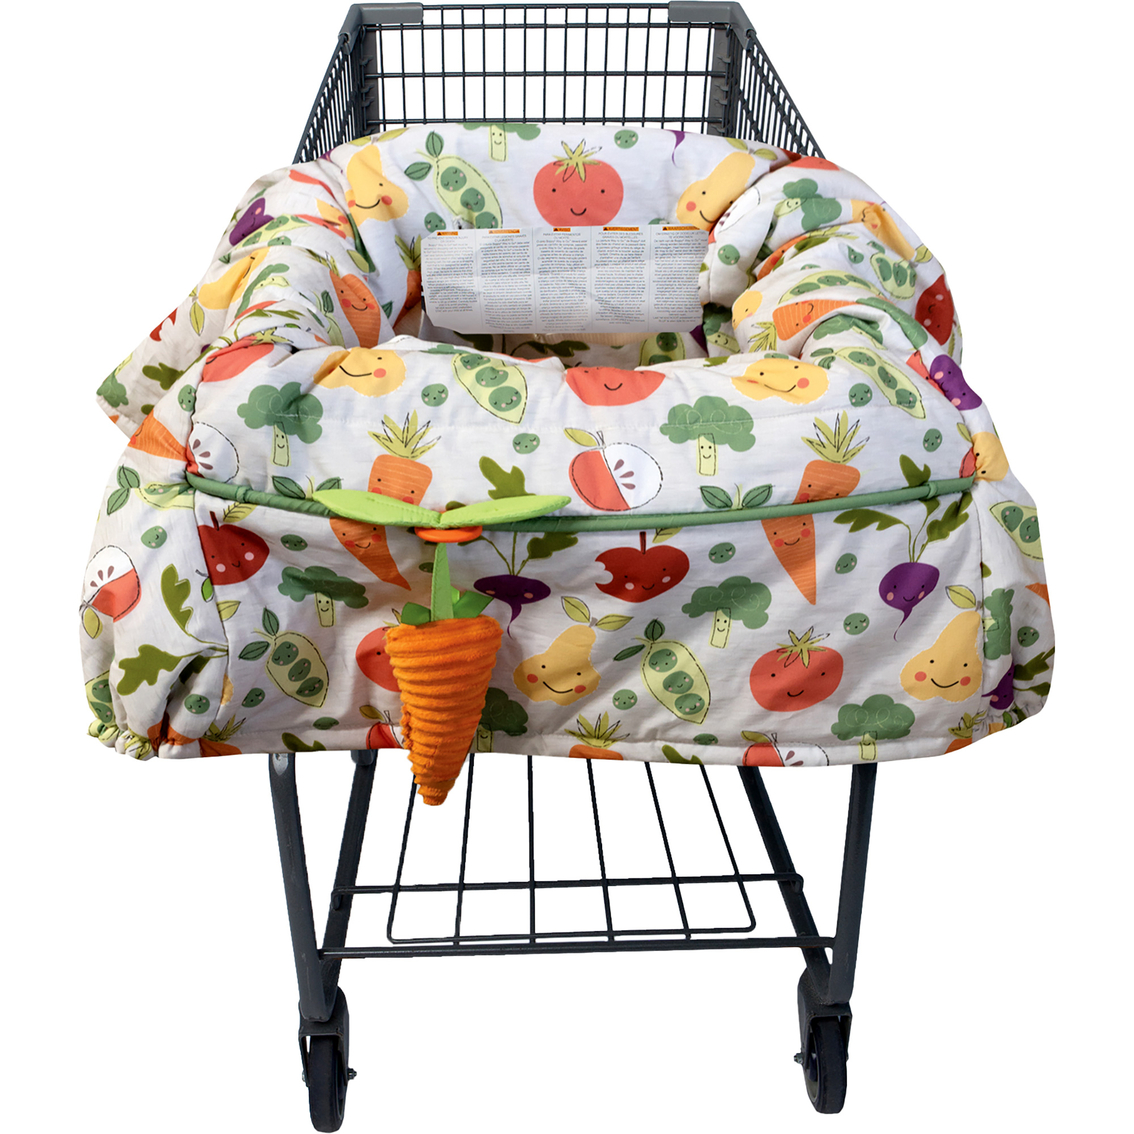 Boppy Farmers Market Shopping Cart Cover - Image 2 of 5